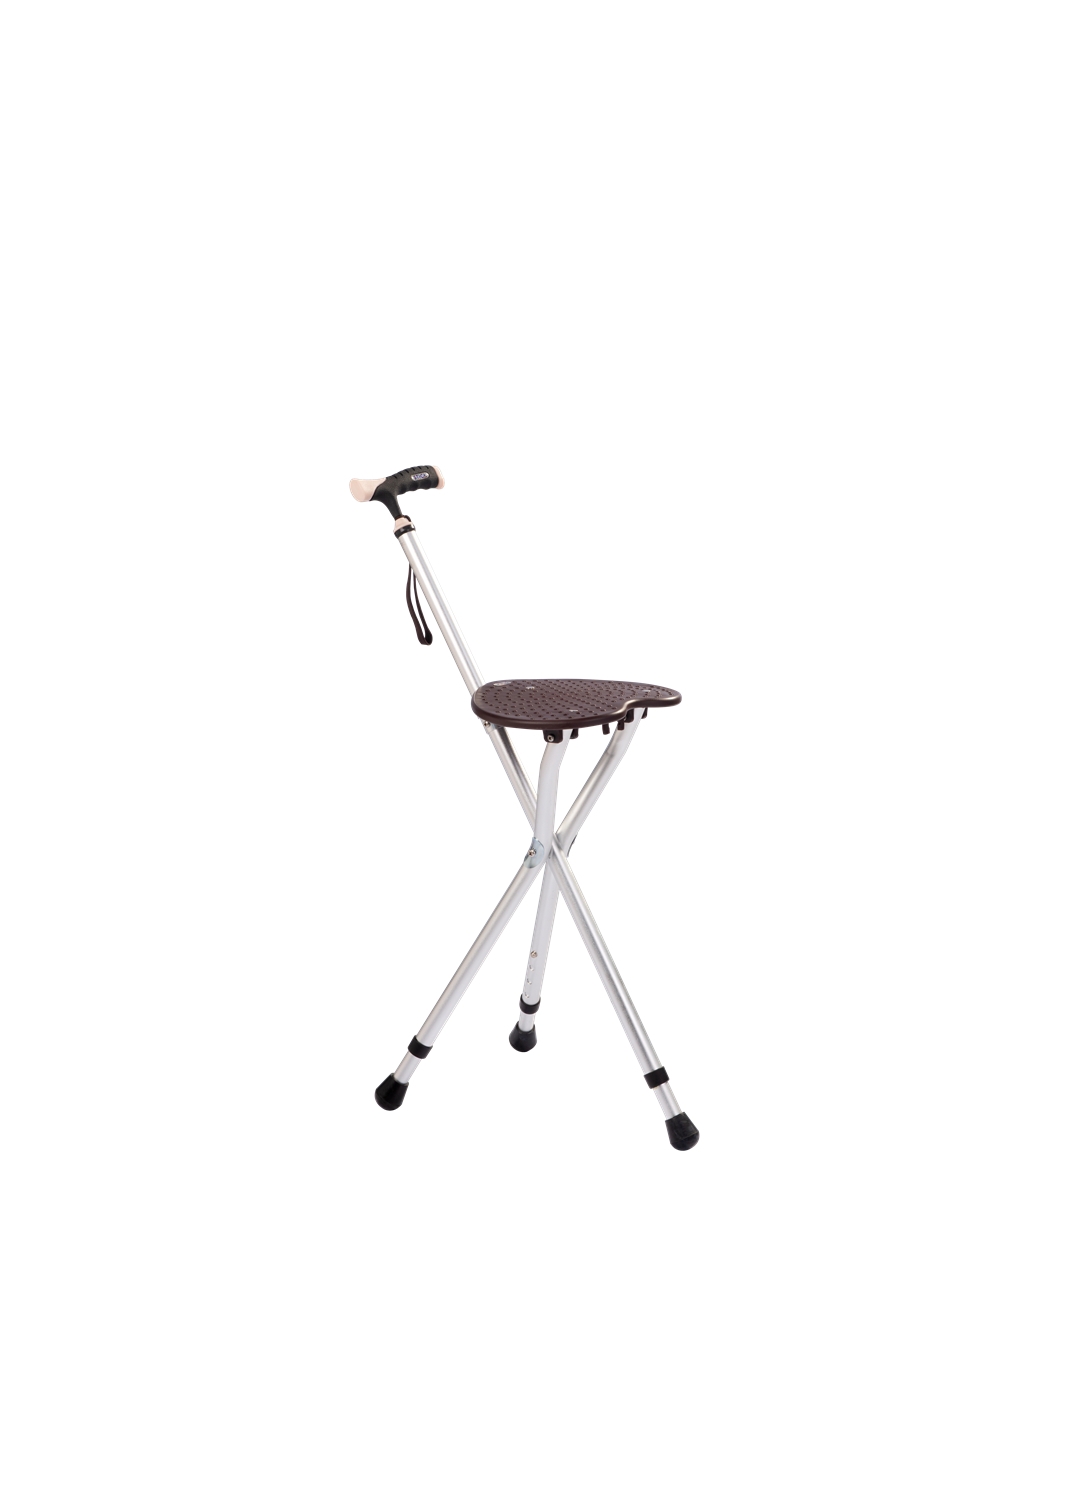 What is the Function of the Crutch Chair?